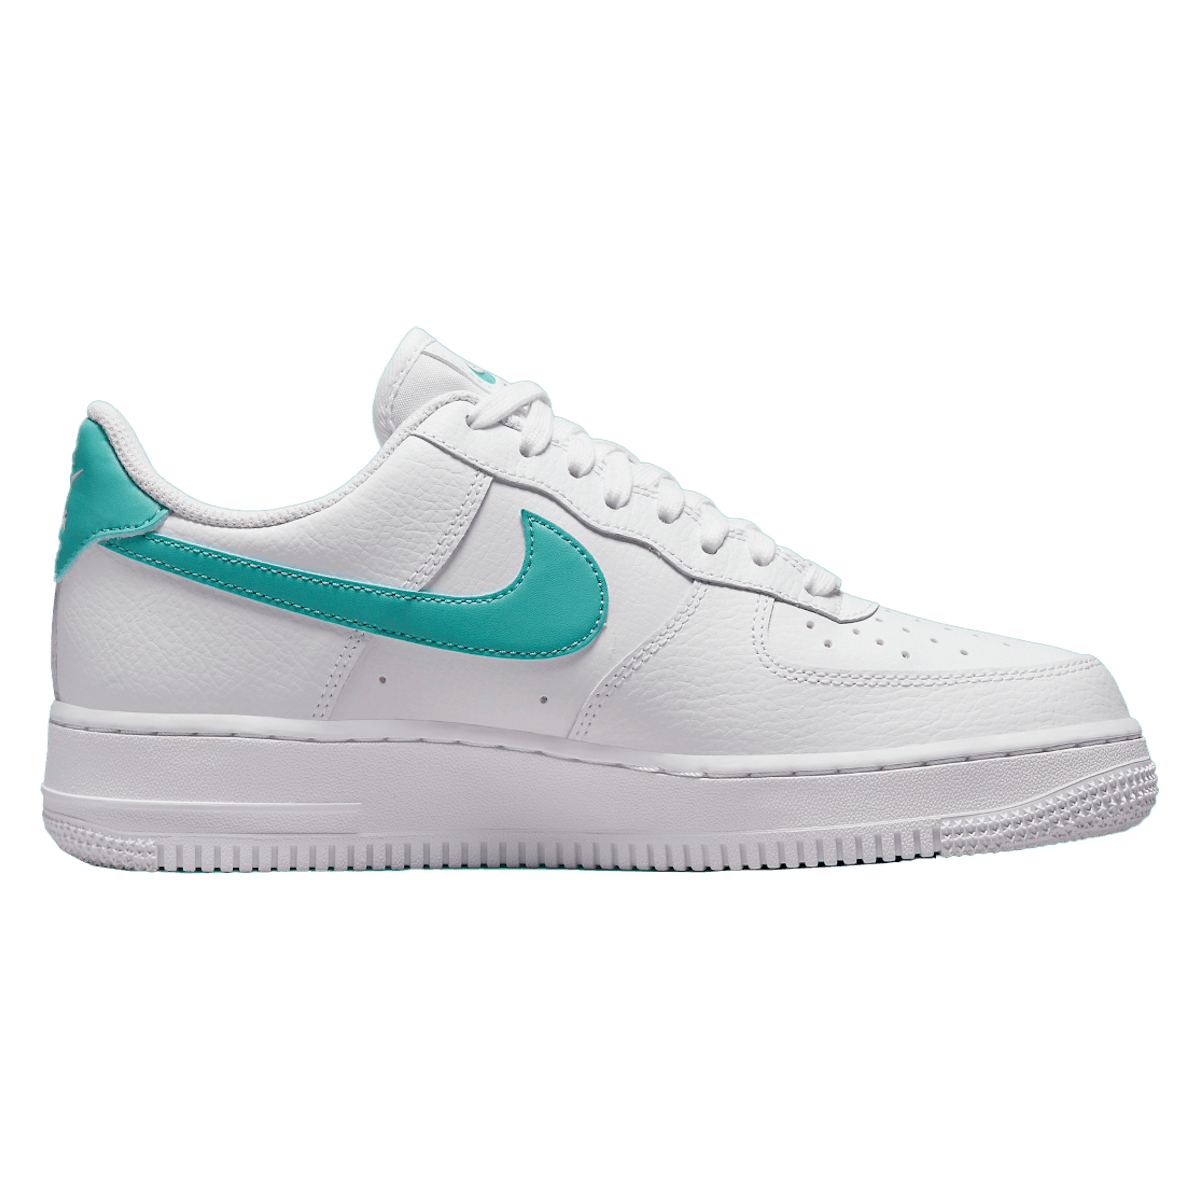 Nike Air Force 1 Low "Washed Teal"